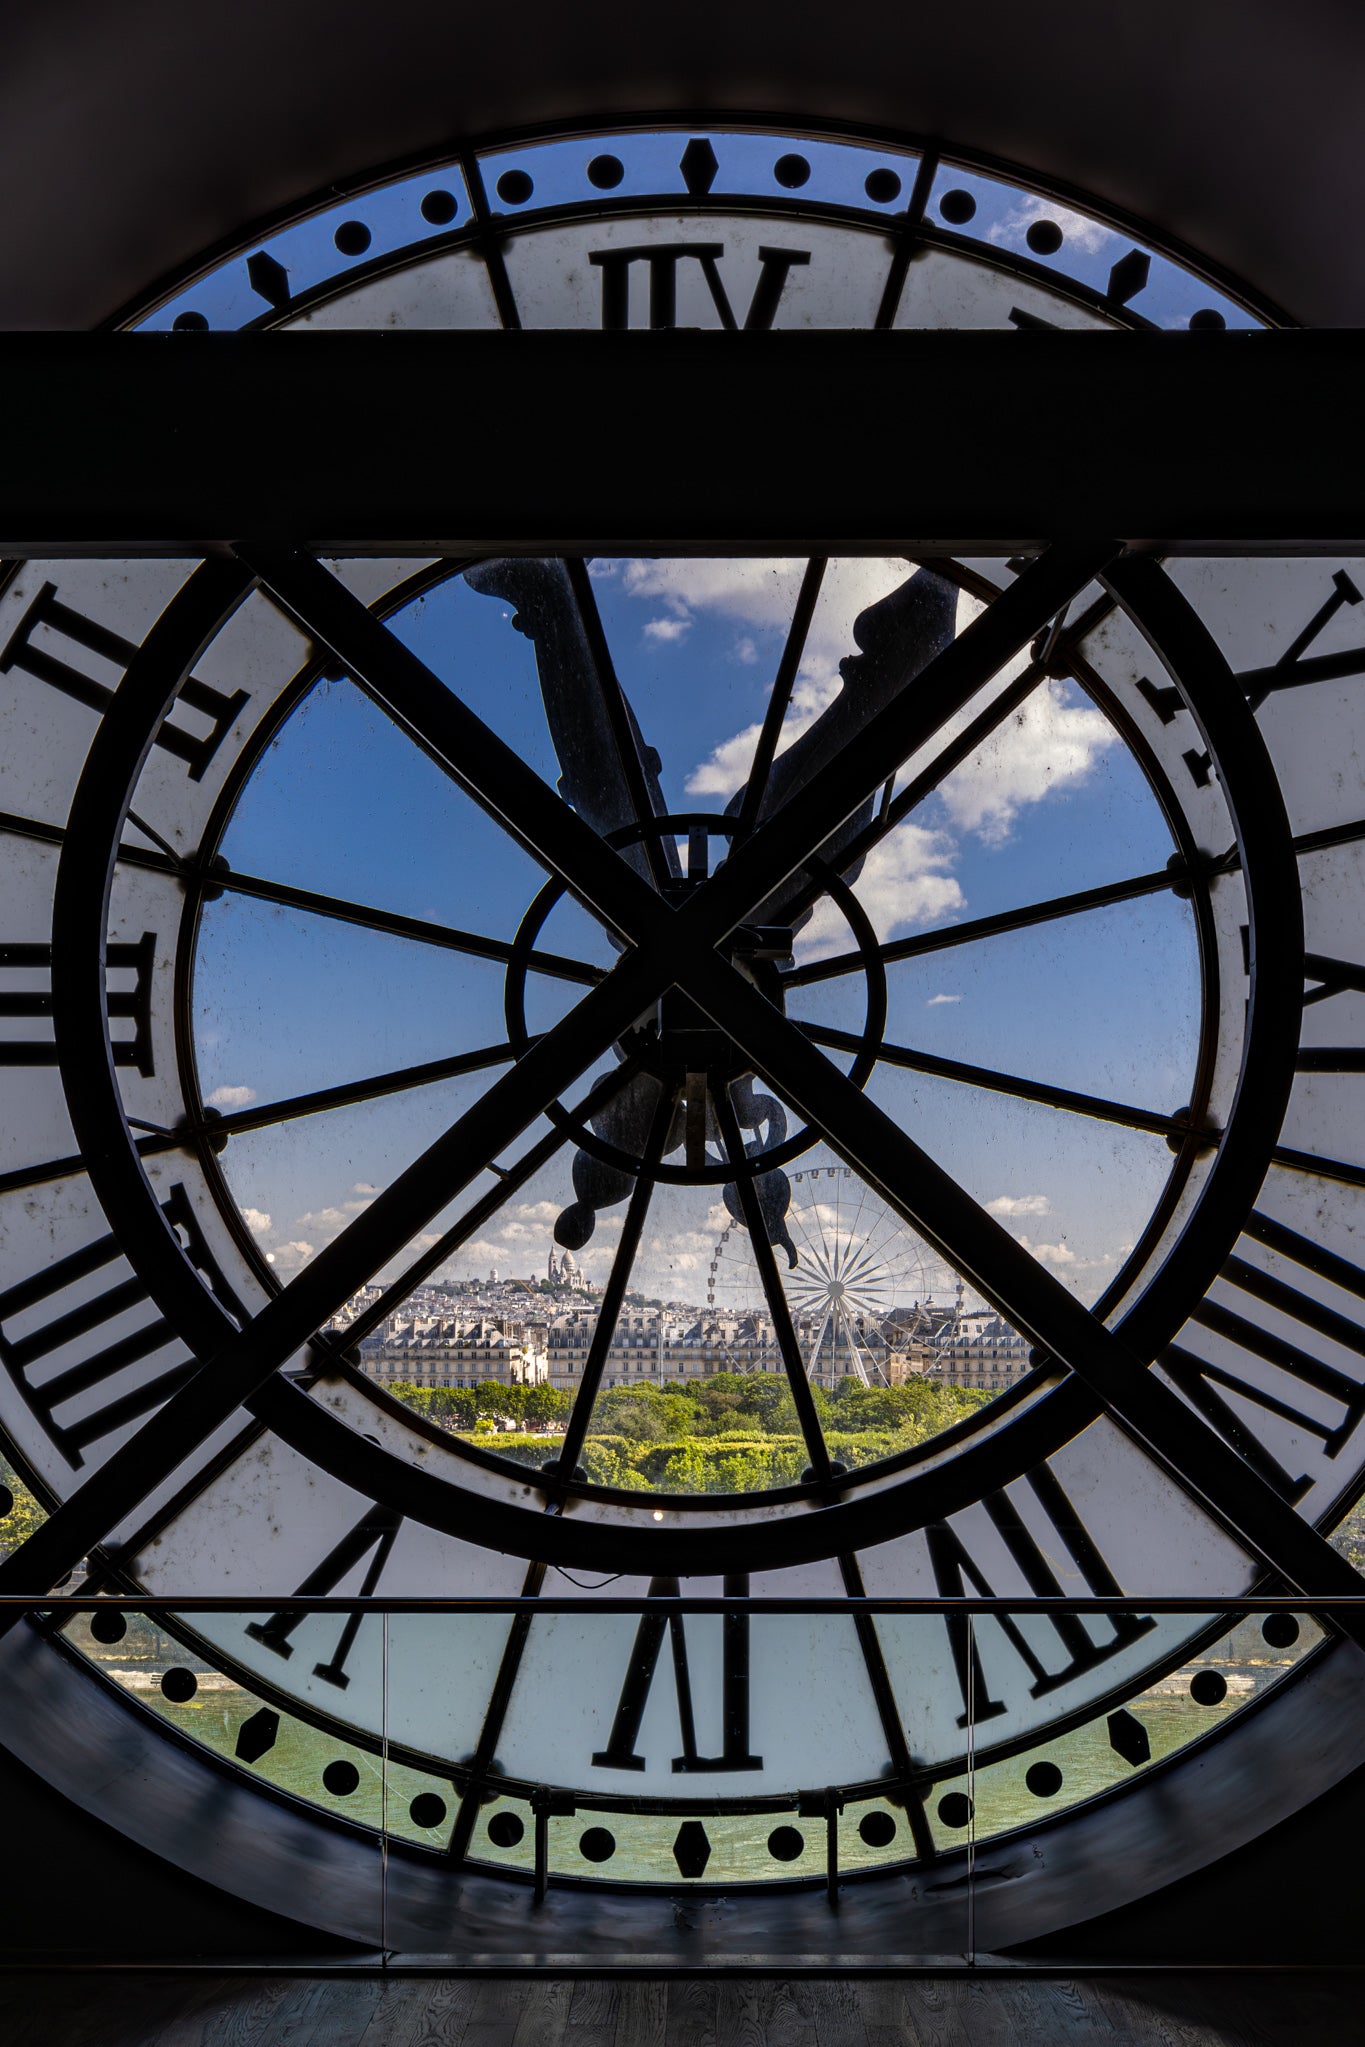 Historic large clock in the Museé d'Orsay